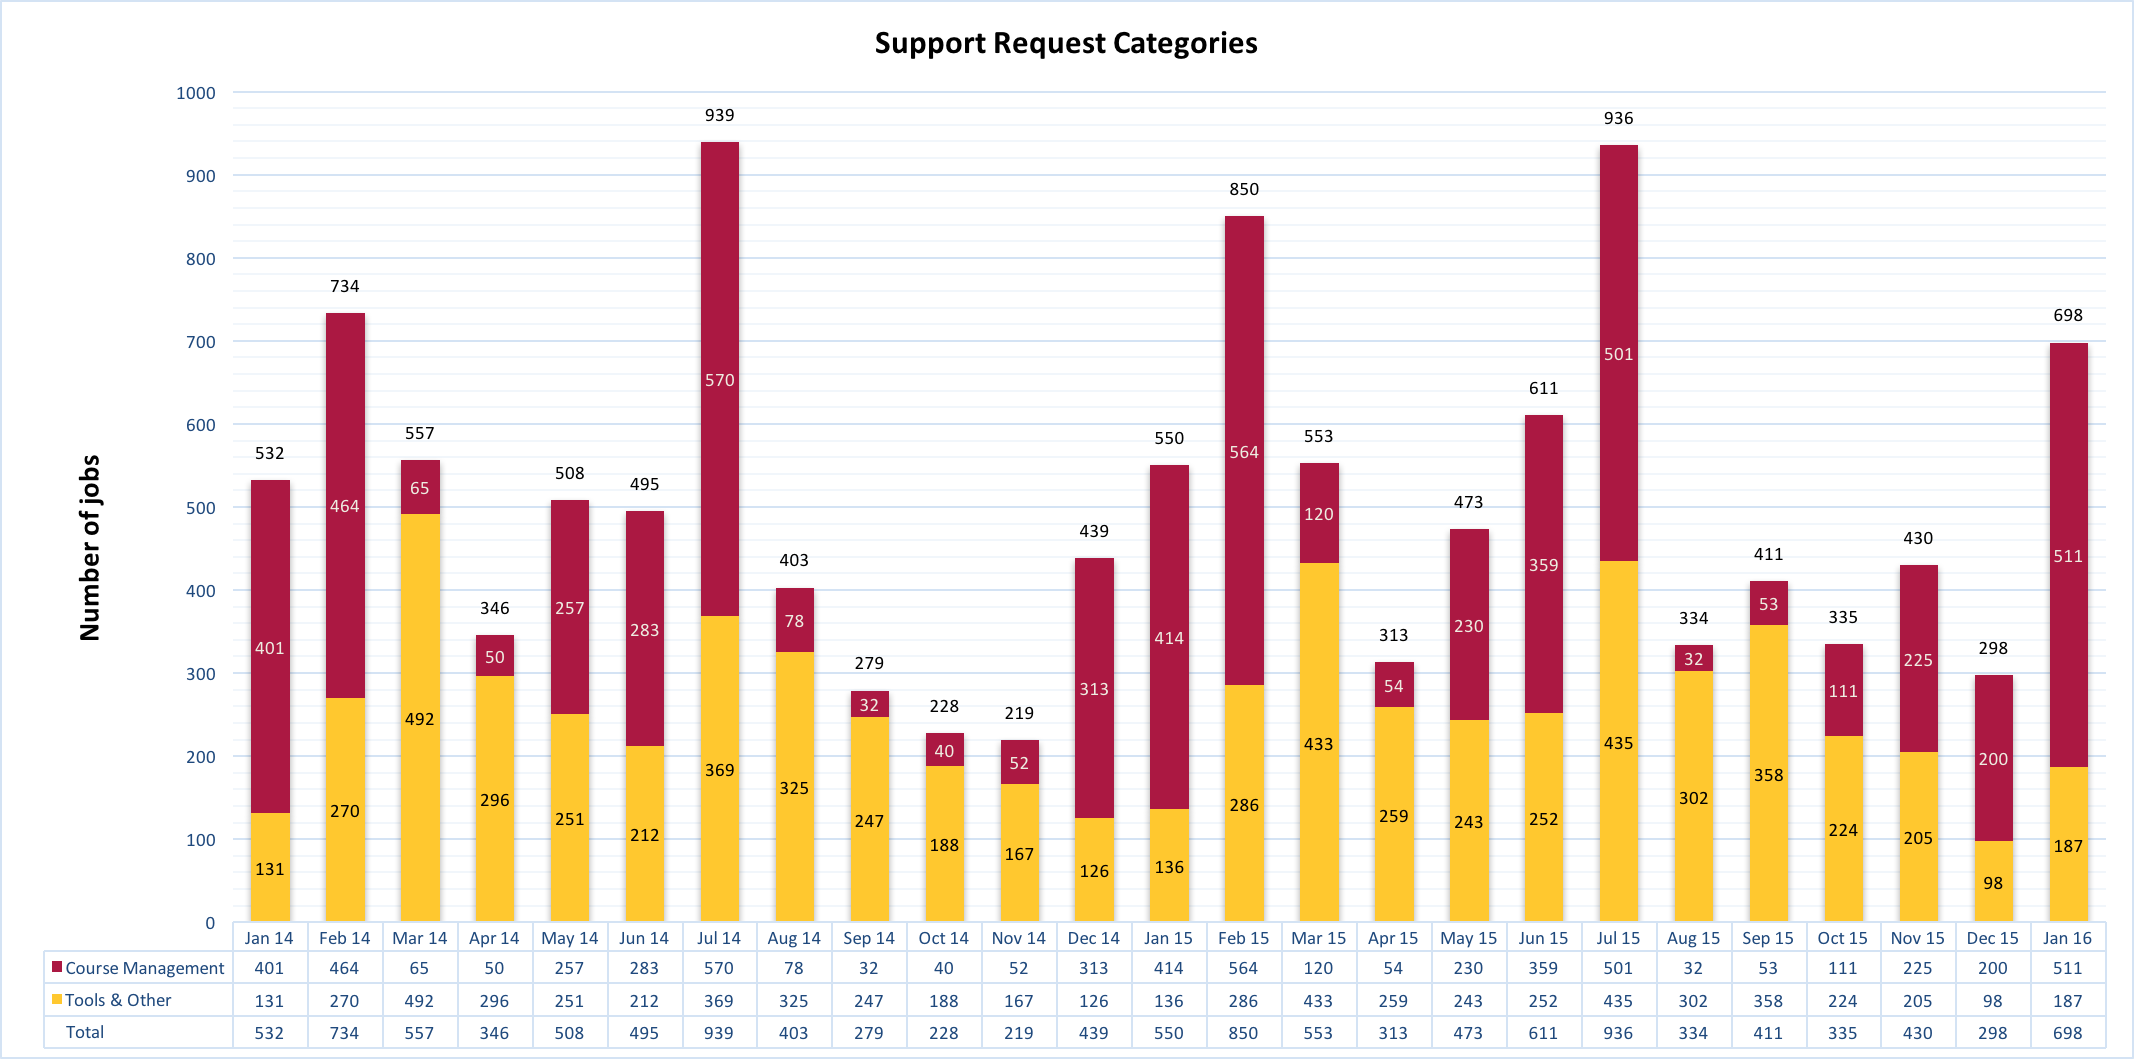 Chart of Support Requests